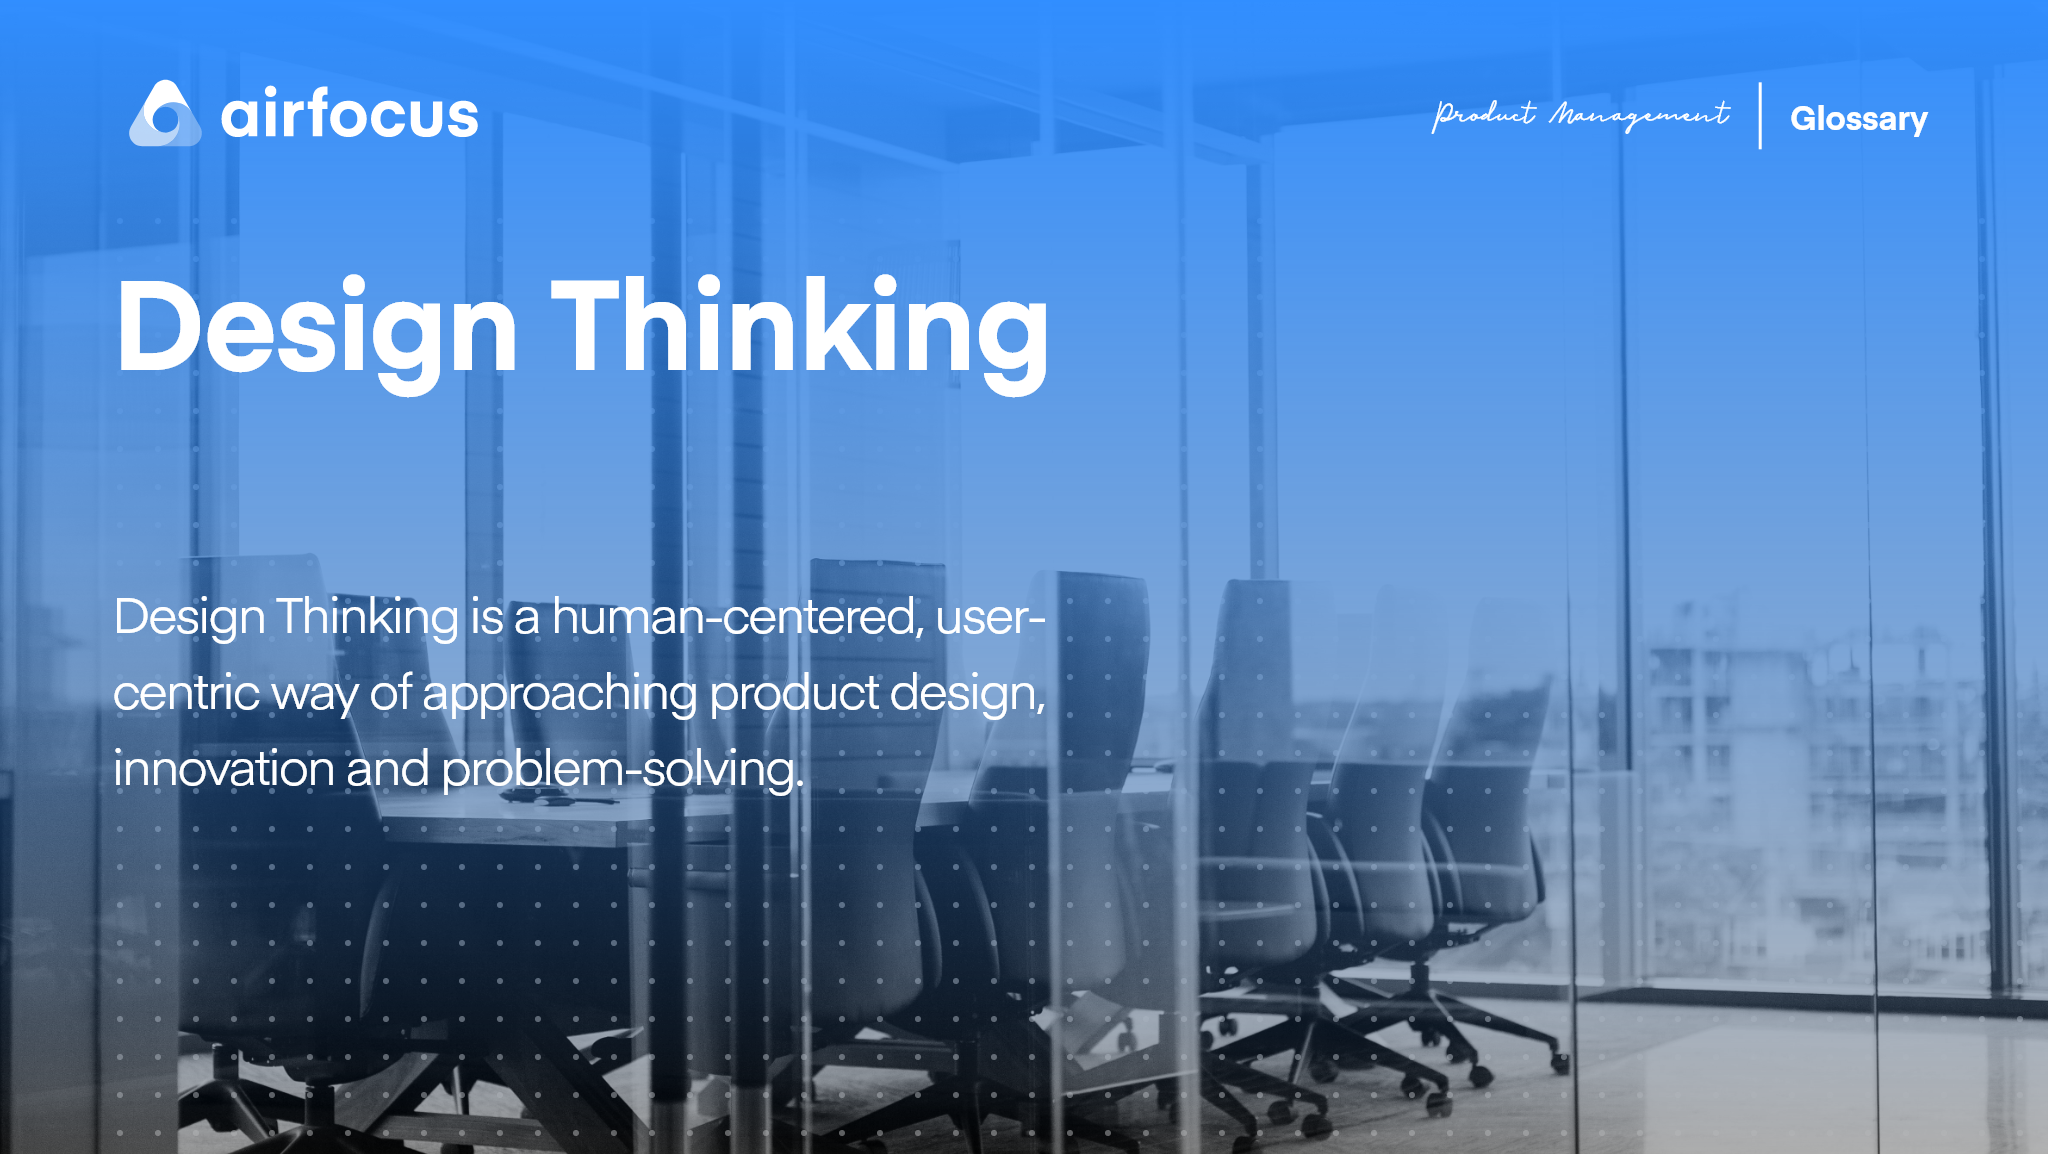 The History of Design Thinking